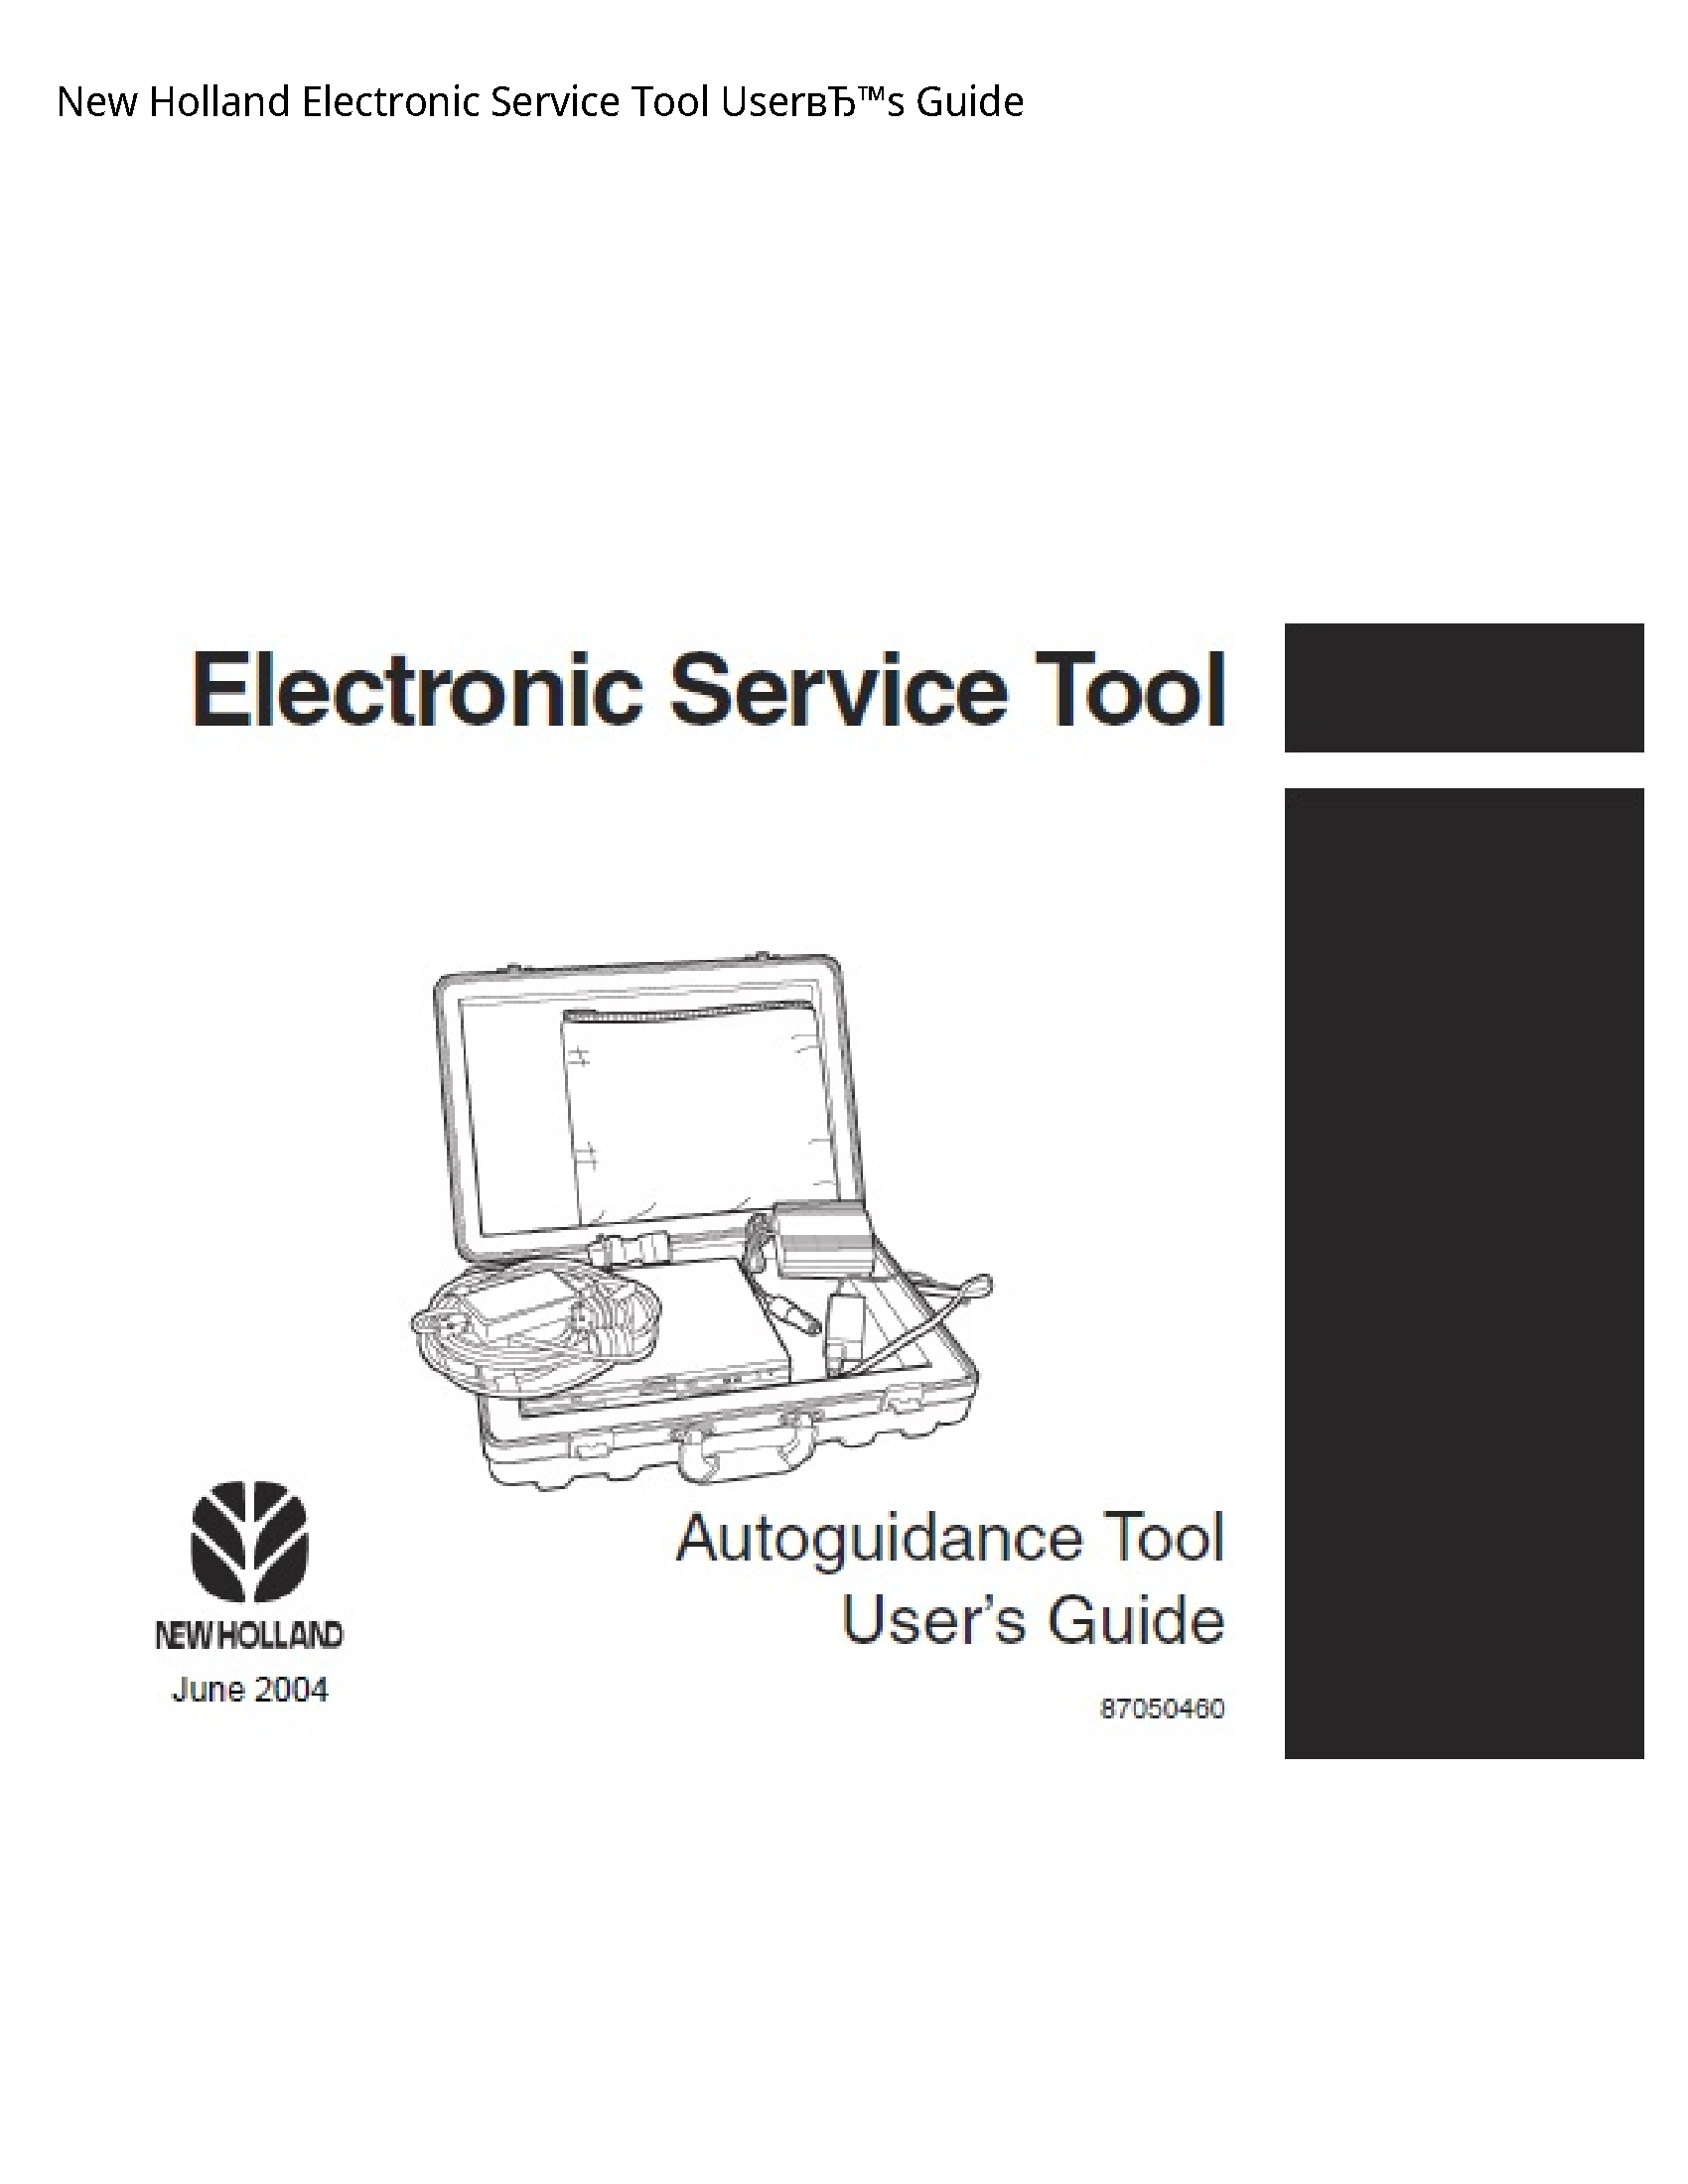 New Holland Electronic Service Tool UserвЂ™s Guide manual